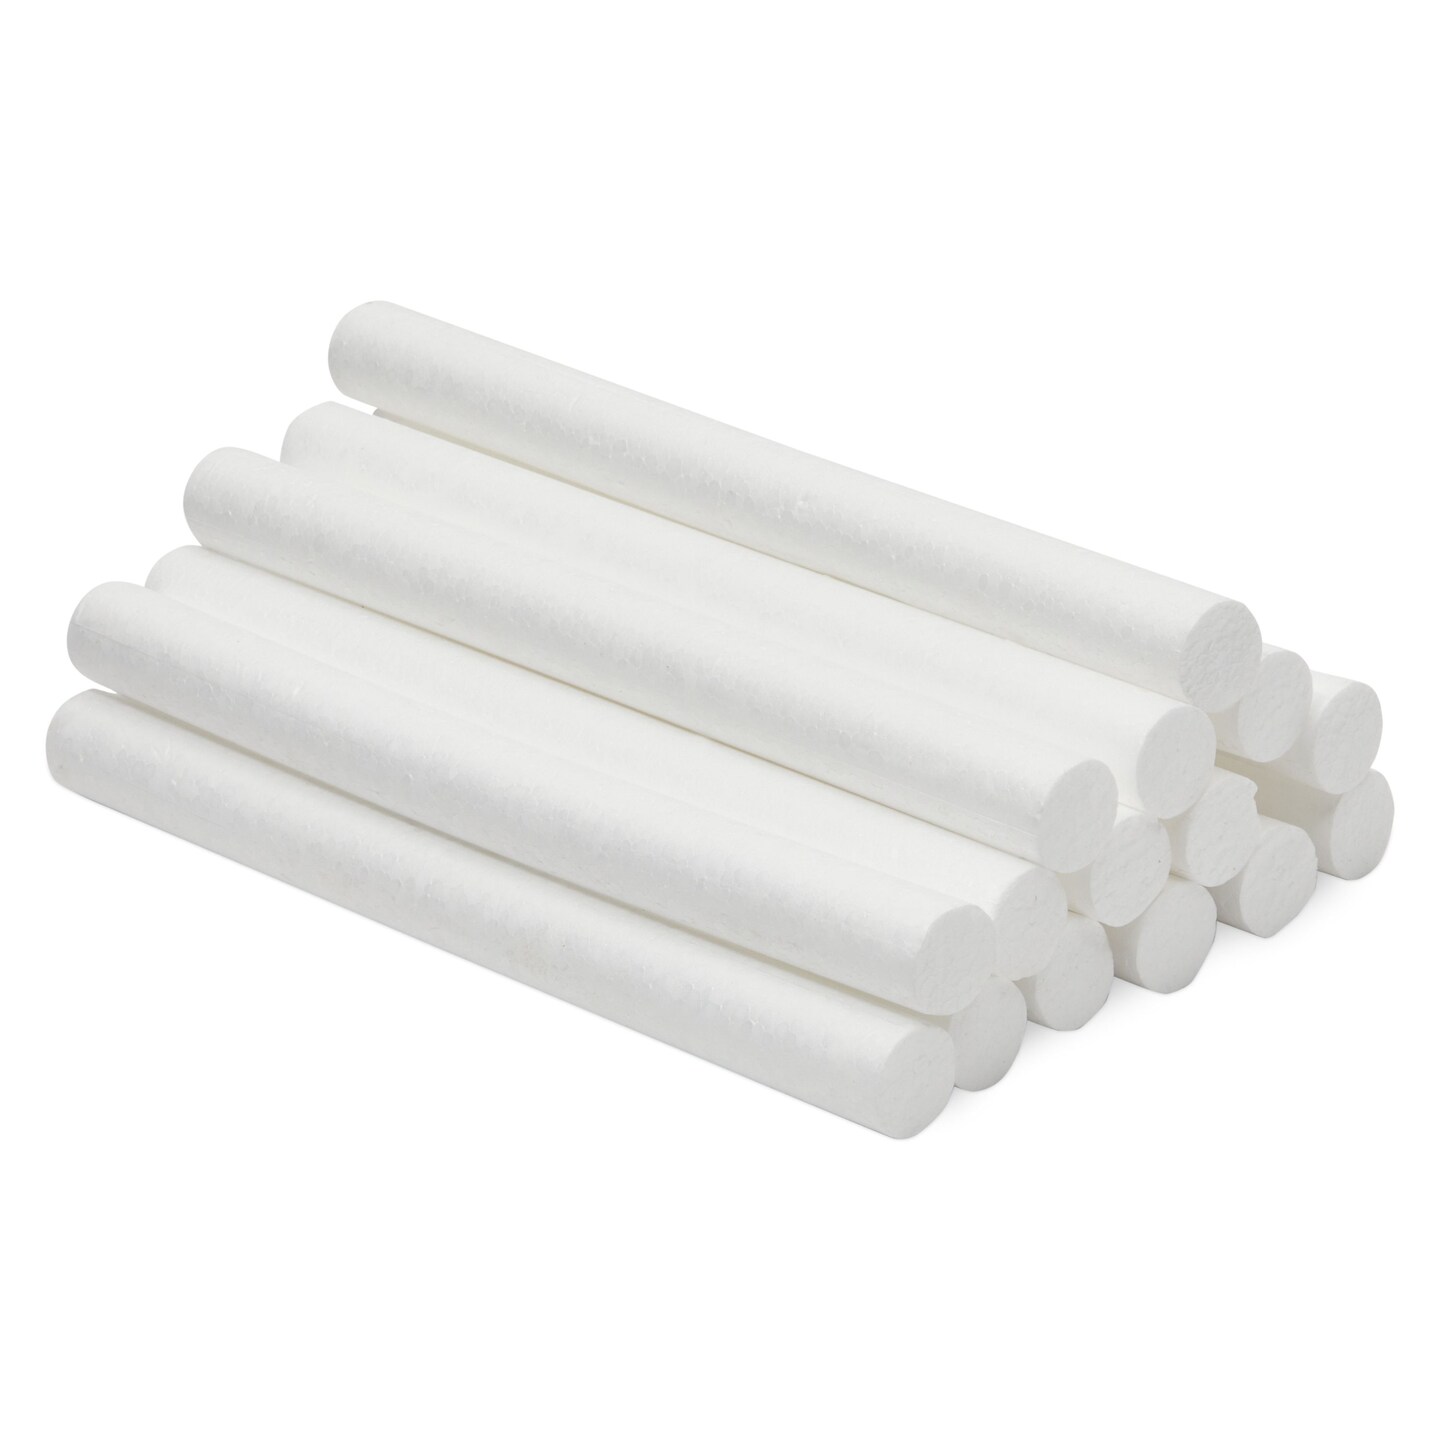 Foam Cylinders for Modeling, DIY Crafts and Arts Supplies (0.9 x